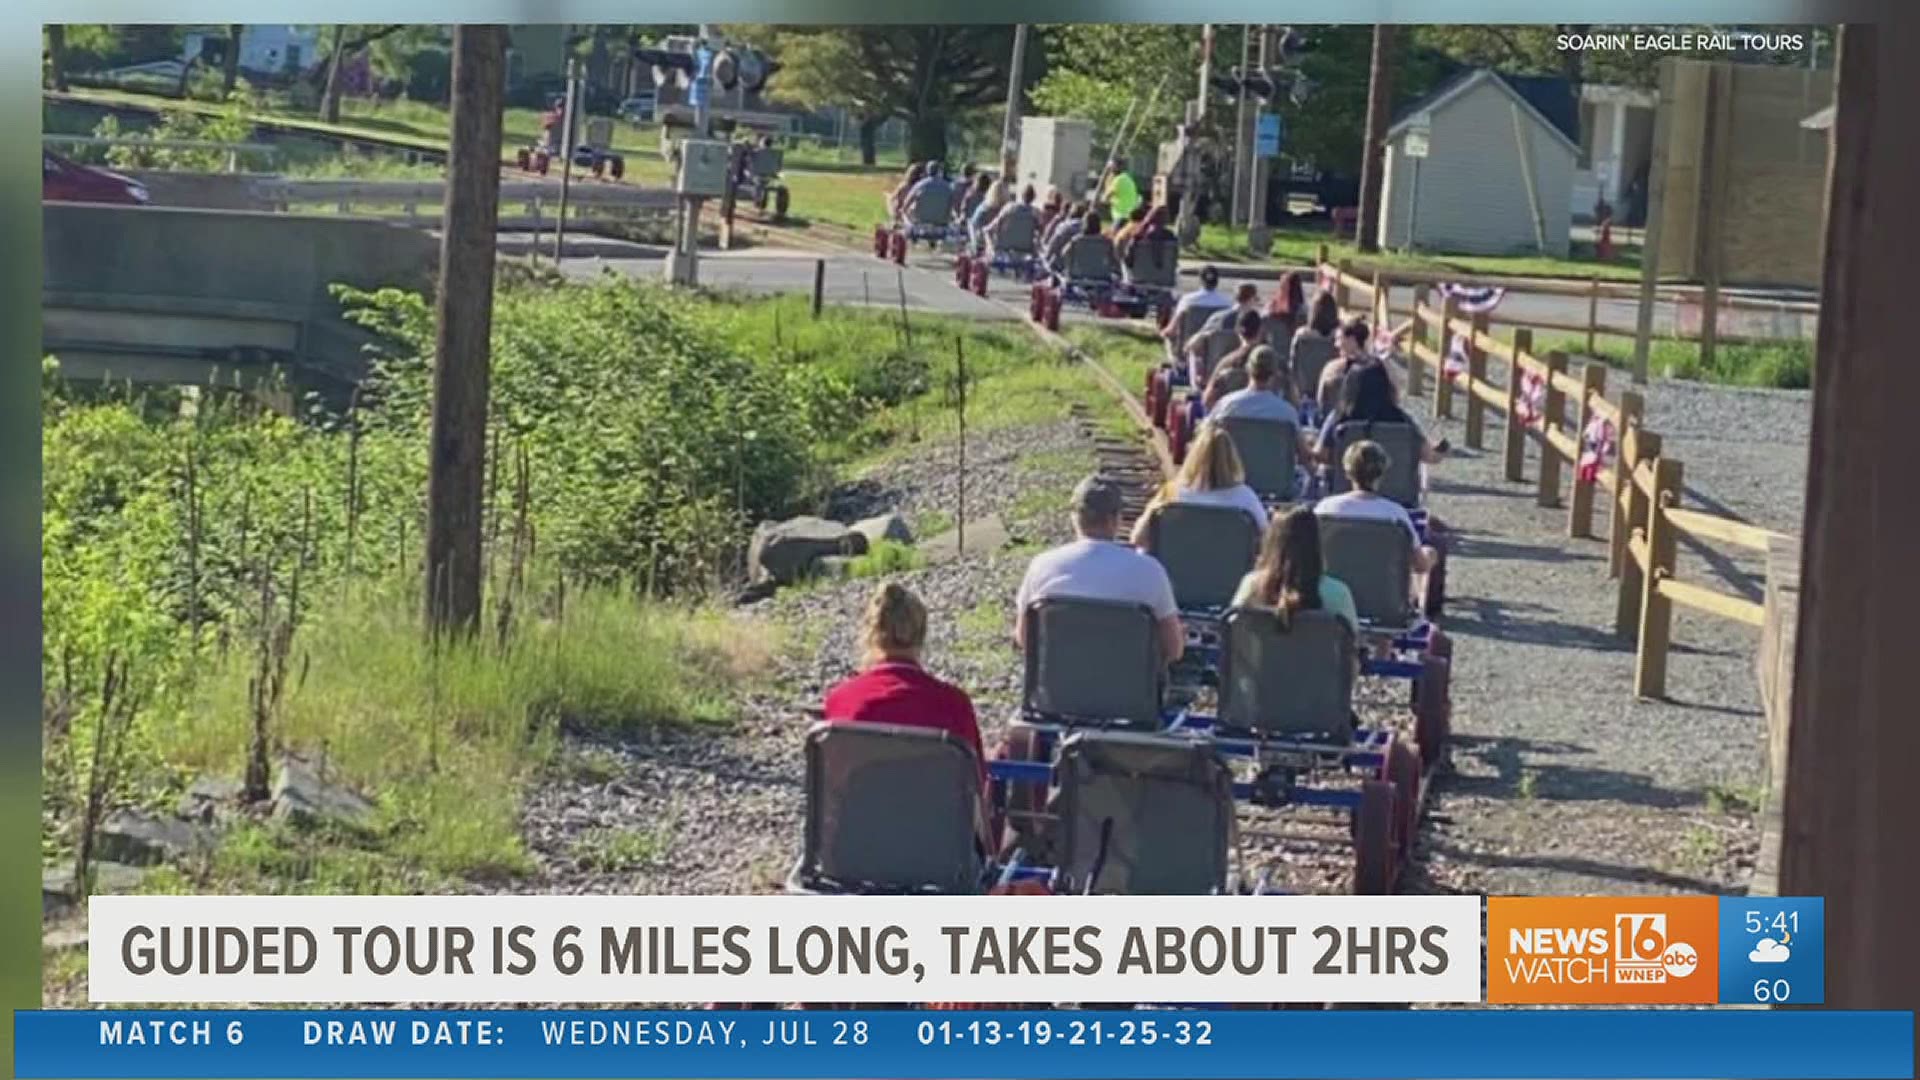 It's a way to get some exercise and soak in our area's amazing scenery at the same time. Newswatch 16's Ryan Leckey took Soarin' Eagle Rail Tours for a spin.